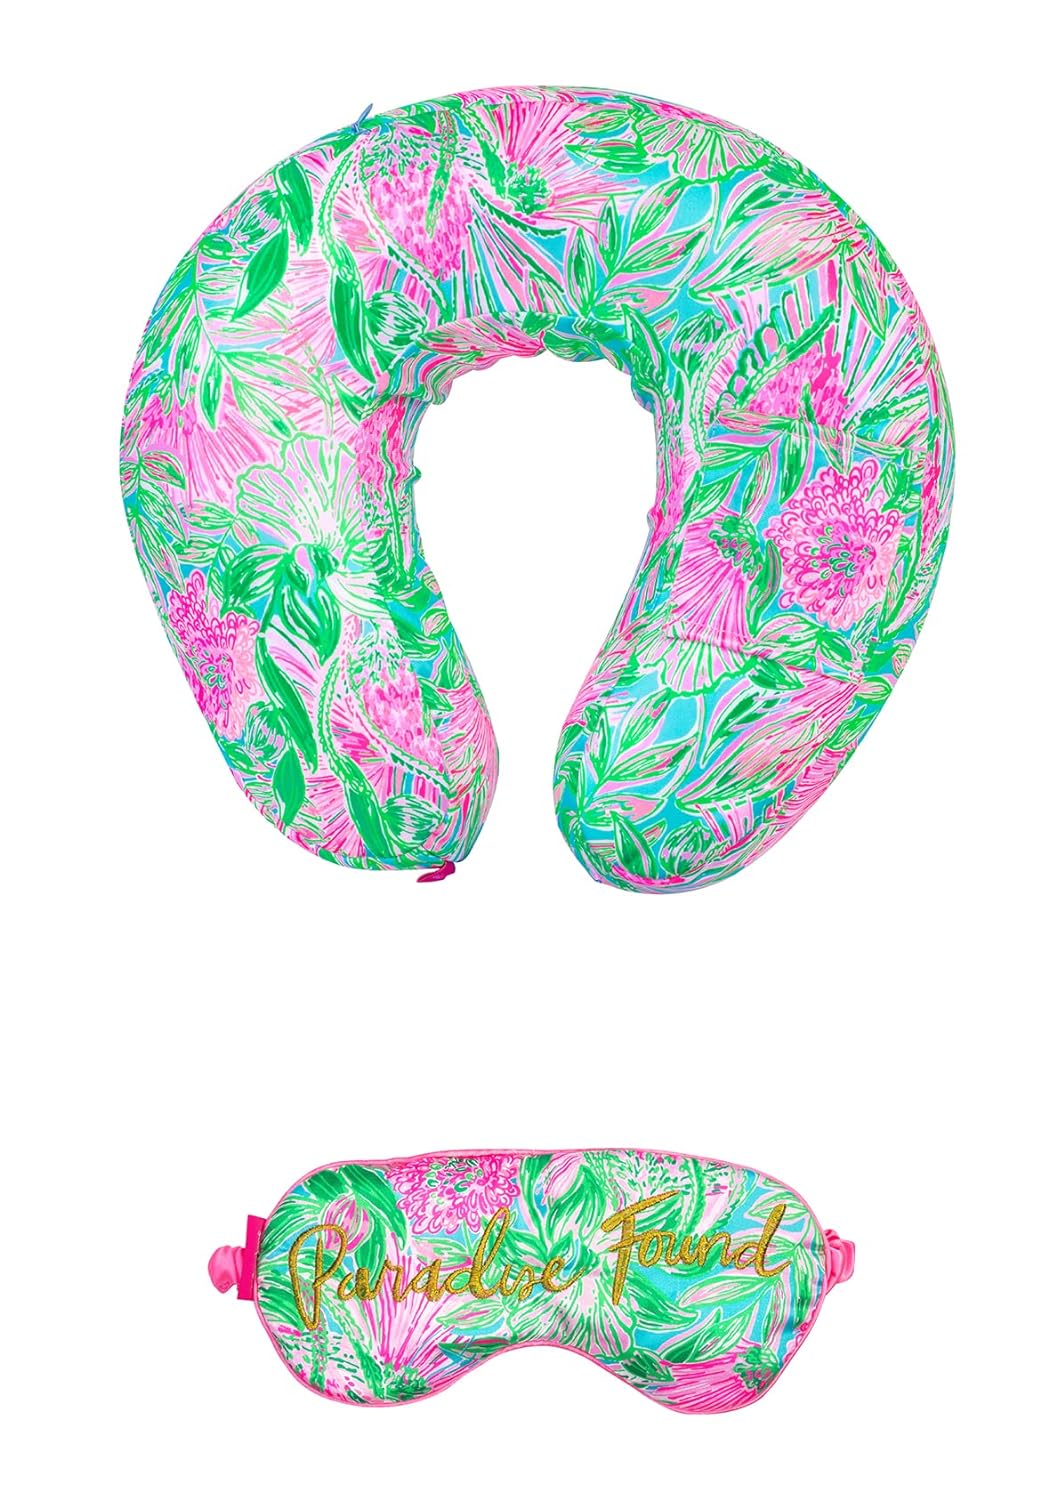 Lilly Pulitzer Travel Pillow and Eye Mask Set, Plush Neck Pillow and Adjustable Sleeping Mask, Cute Travel Accessories for Airplane, Coming in Hot